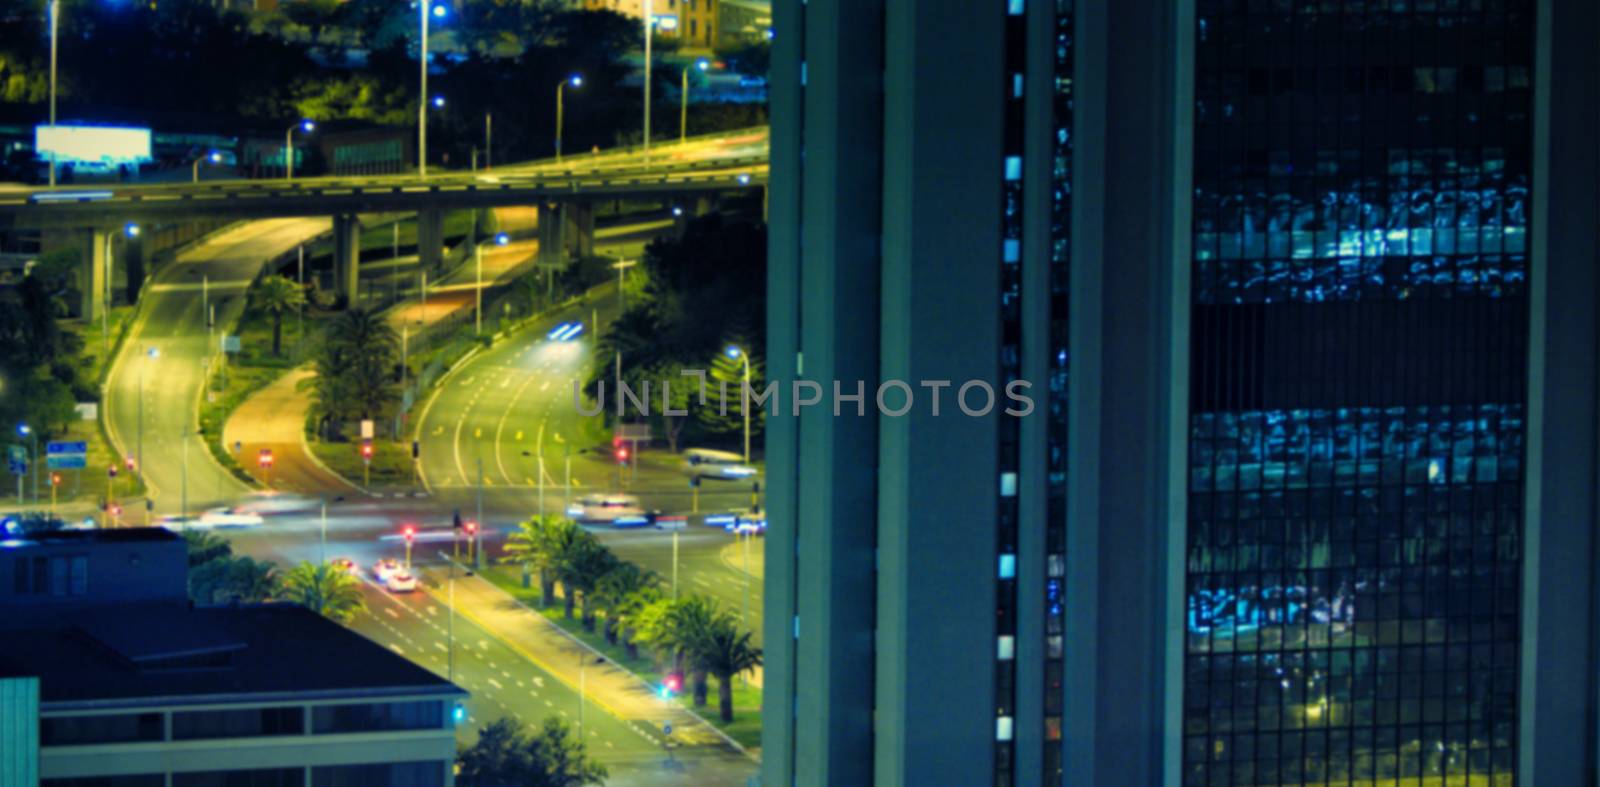 Cars moving on road seen through window at night